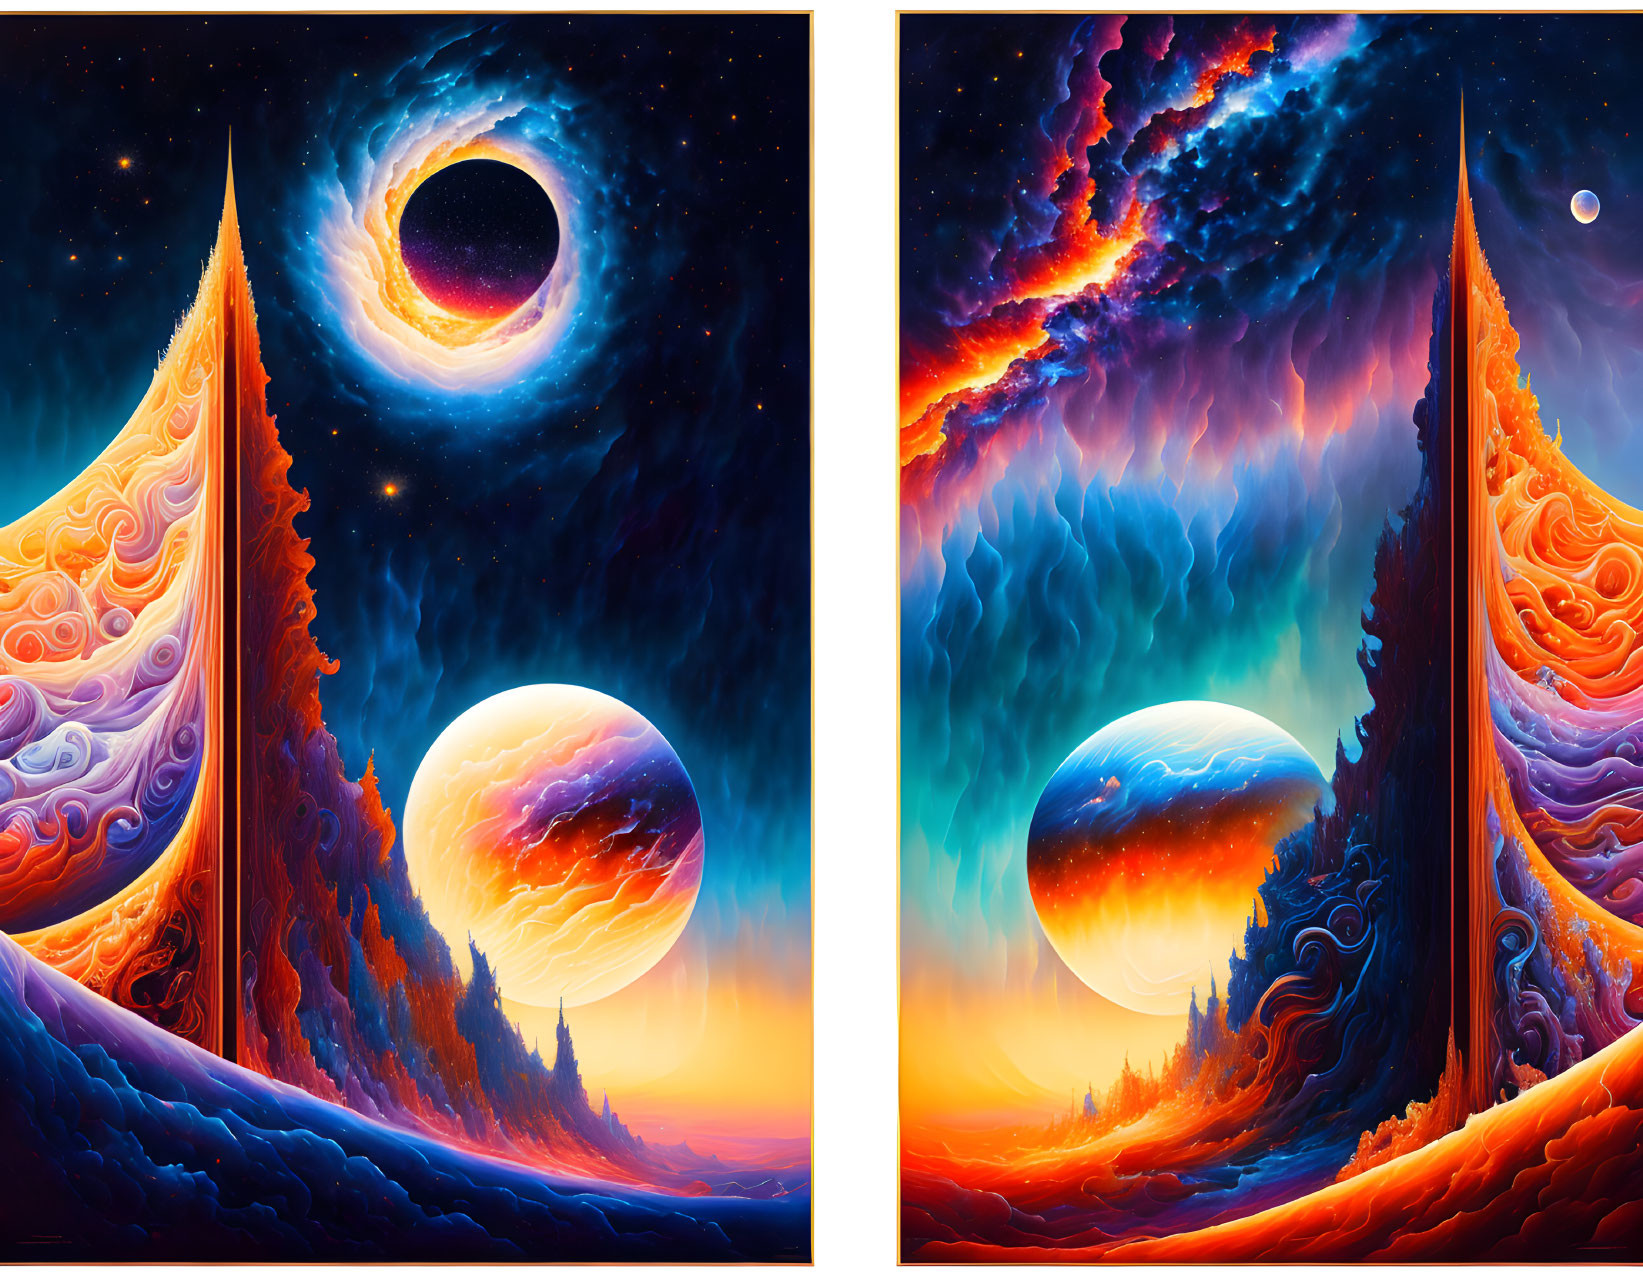 Surreal landscape with celestial bodies and swirling patterns